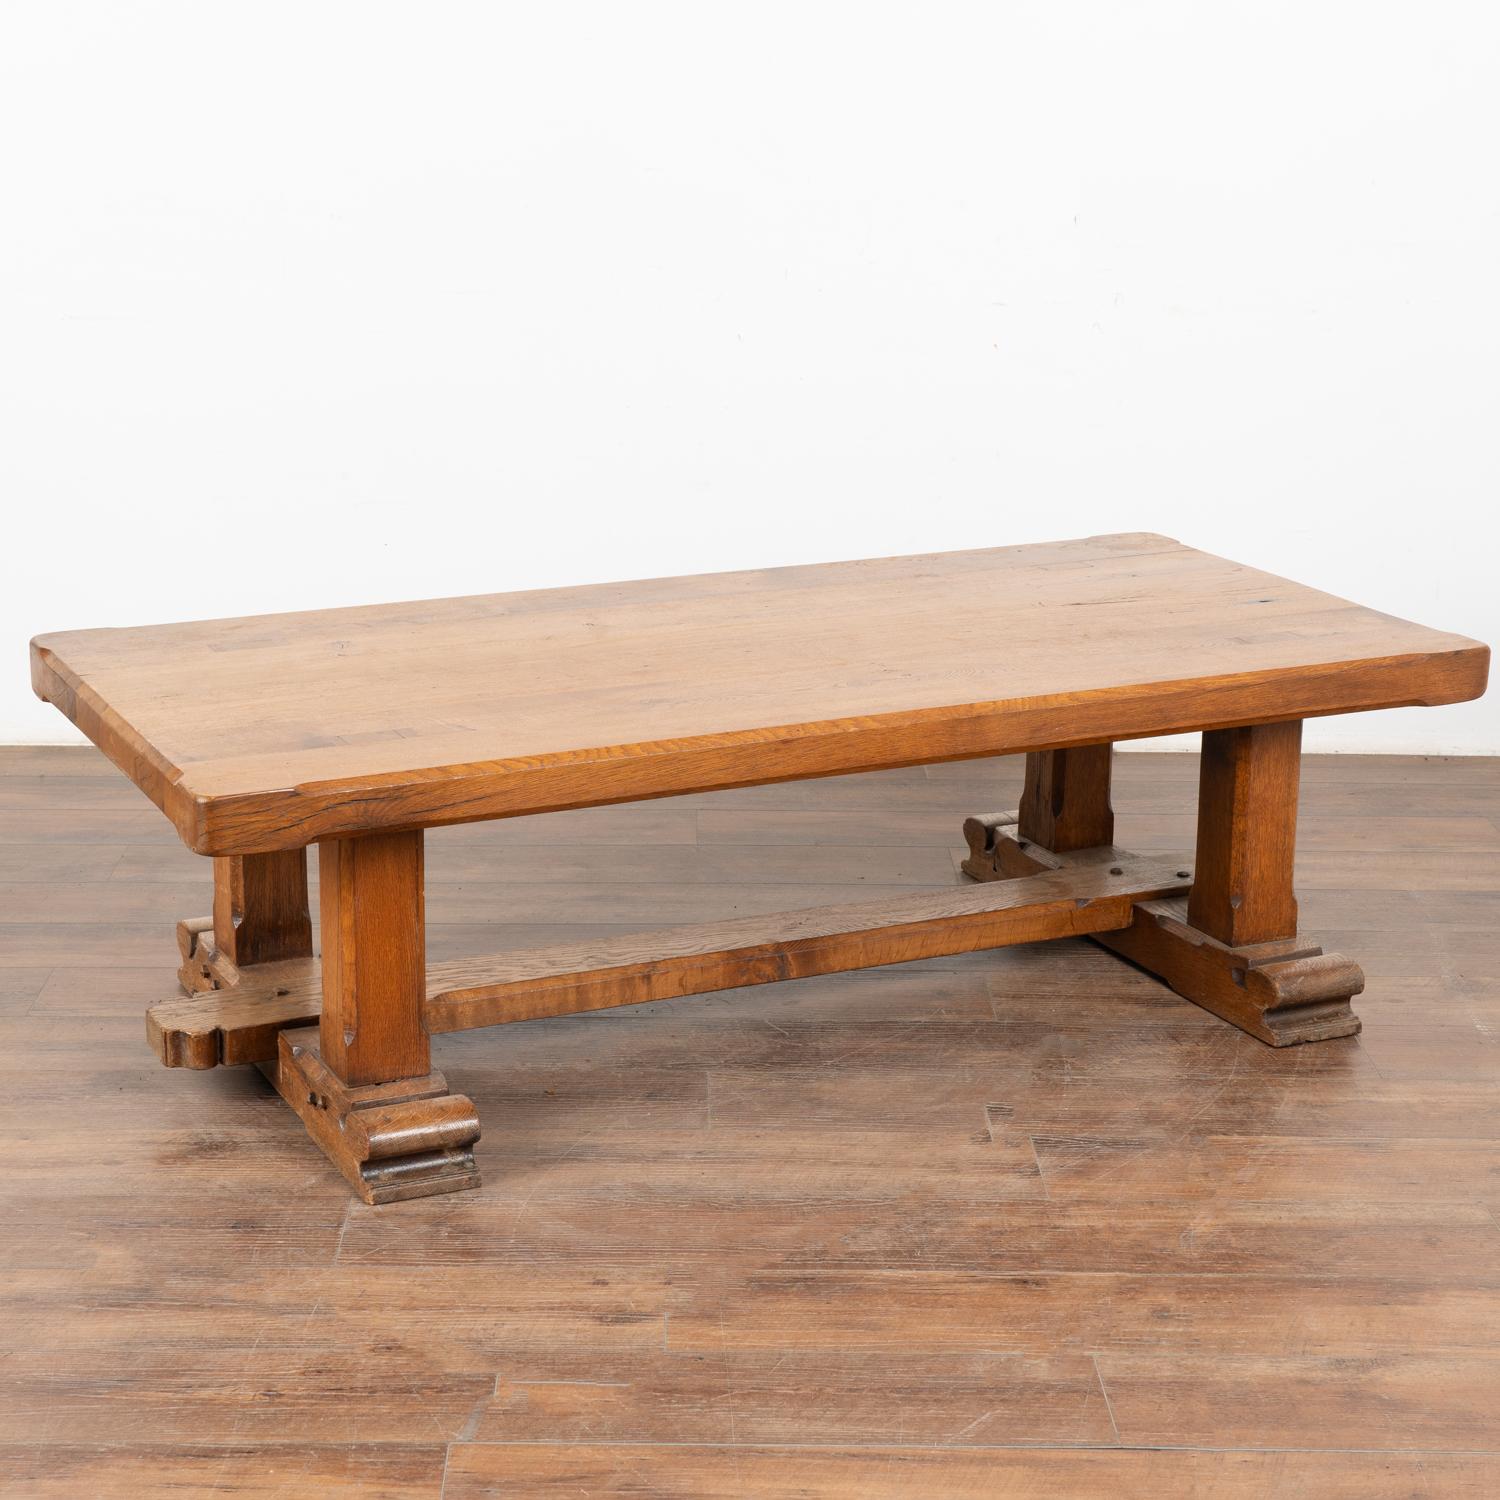 The appeal of this heavy French oak coffee table comes from the rich patina of the wood. Every crack, ding, old knot and stain all add to the depth and richness found in the thick top. Note how the darker color of the legs inset into the top also